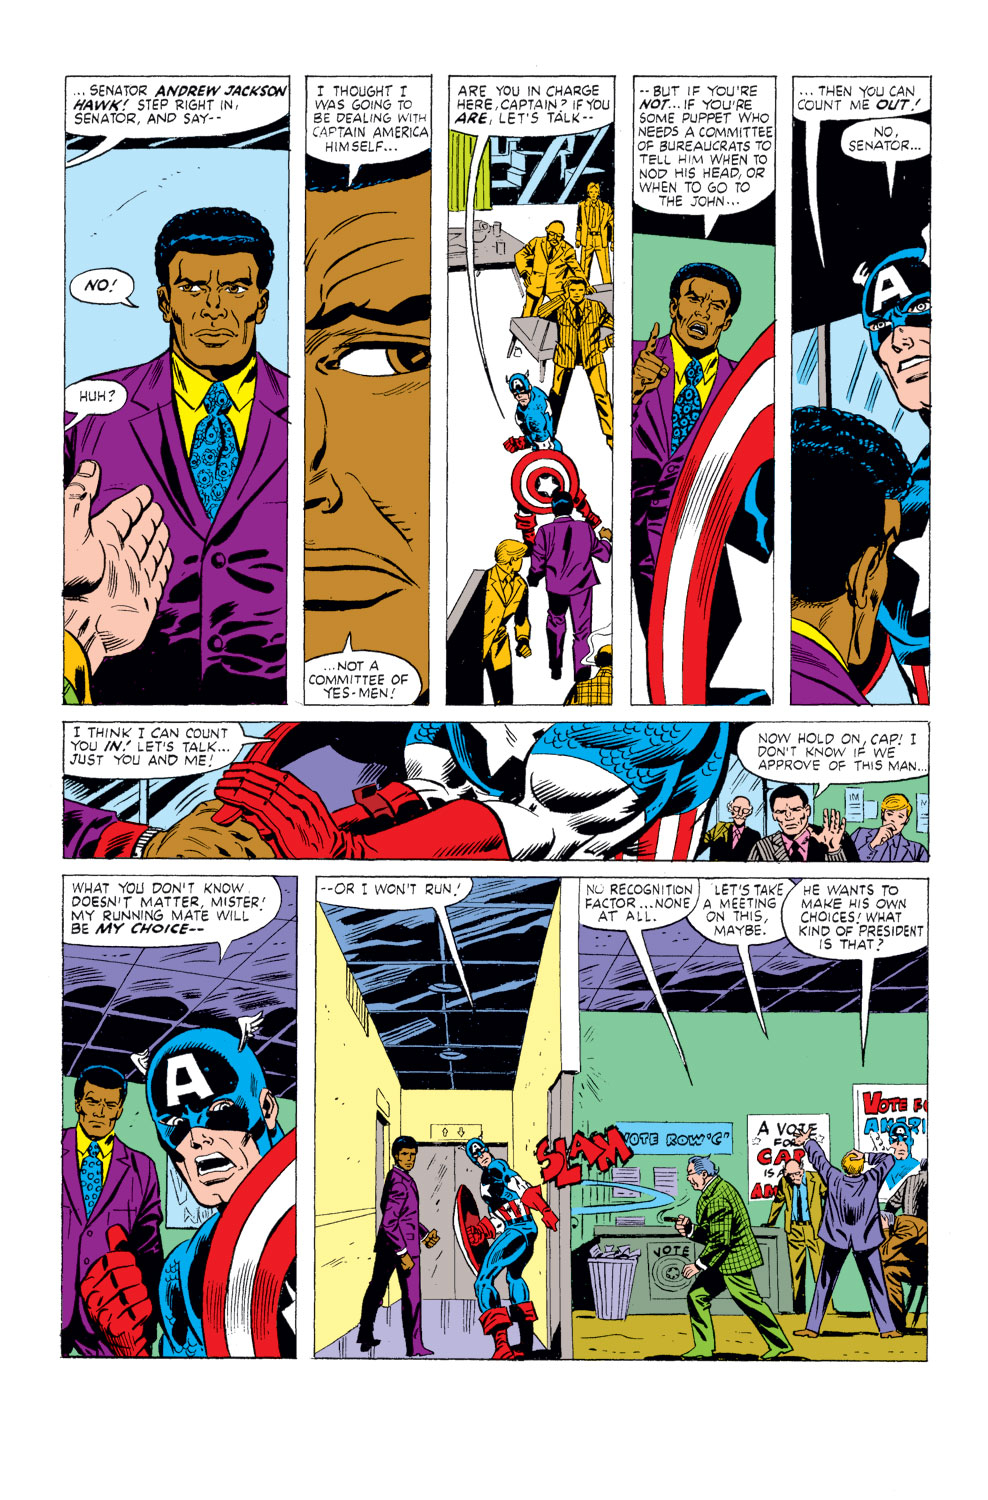 What If? (1977) issue 26 - Captain America had been elected president - Page 6